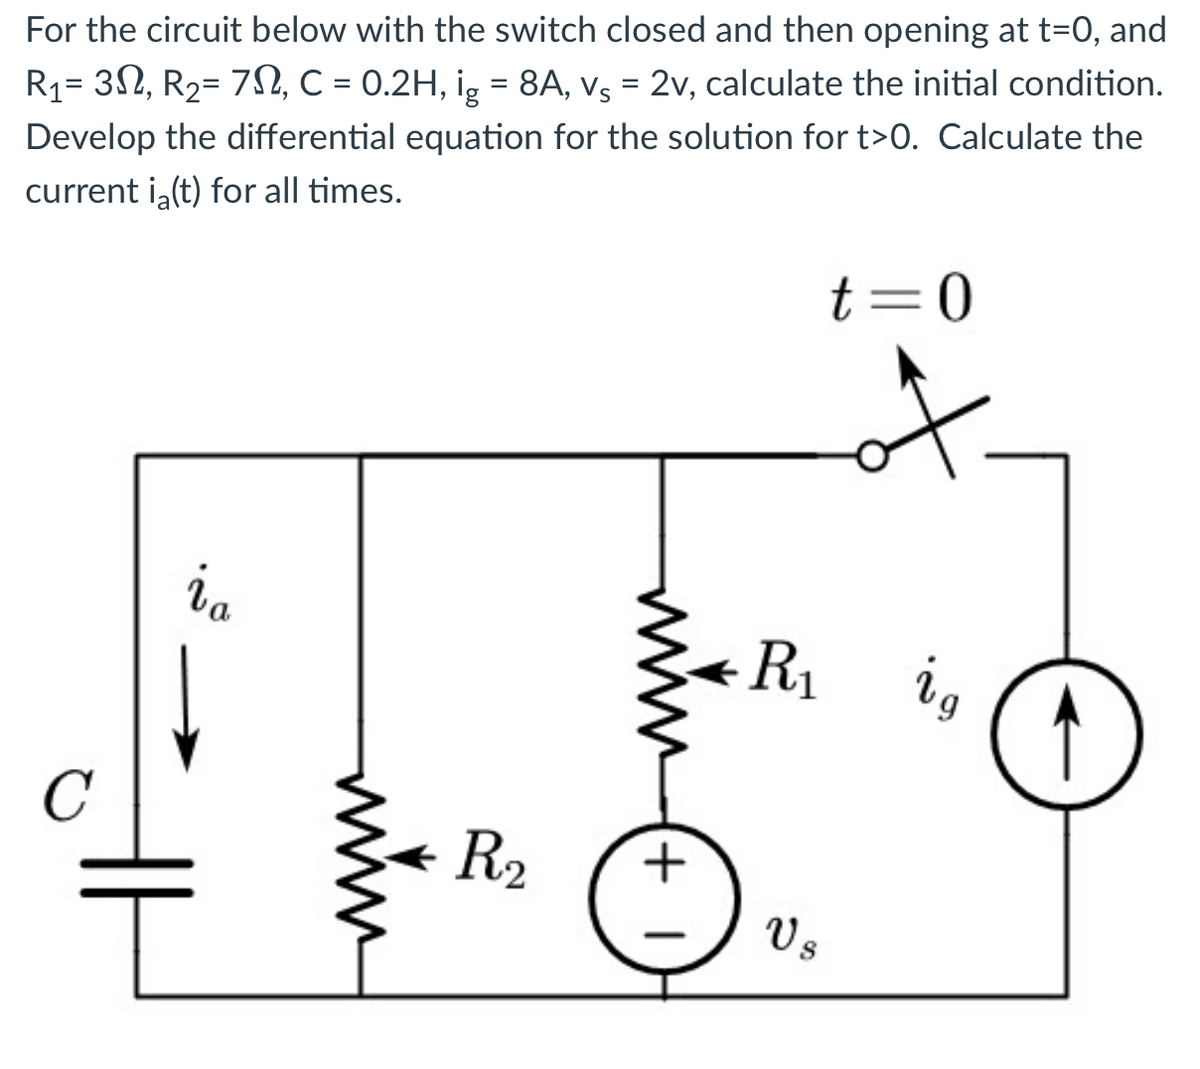 For the circuit below with the switch closed and then opening at t=0, and
R₁= 3, R₂= 7N, C = 0.2H, ig = 8A, vç = 2v, calculate the initial condition.
Develop the differential equation for the solution for t>0. Calculate the
current ia(t) for all times.
C
ia
mim
R₂
+1
t=0
R₁
Vs
8
ig